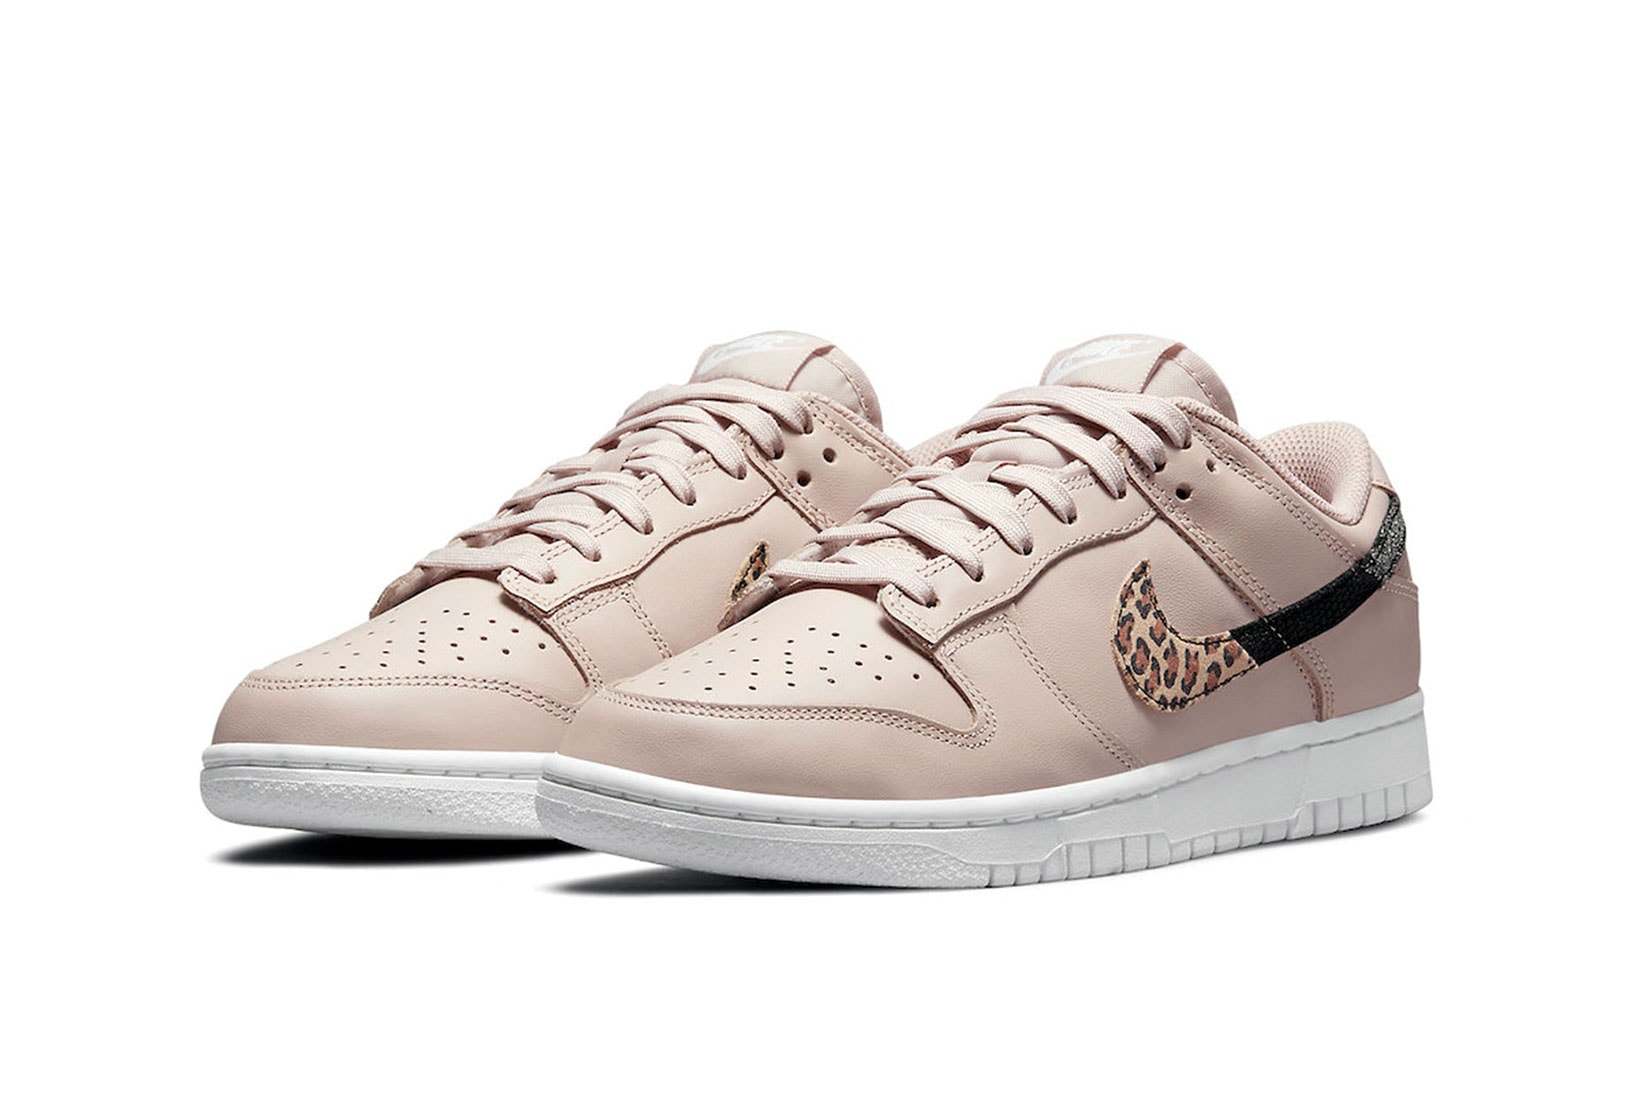 Nike Dunk Low "Animal Print" dusty pink front view